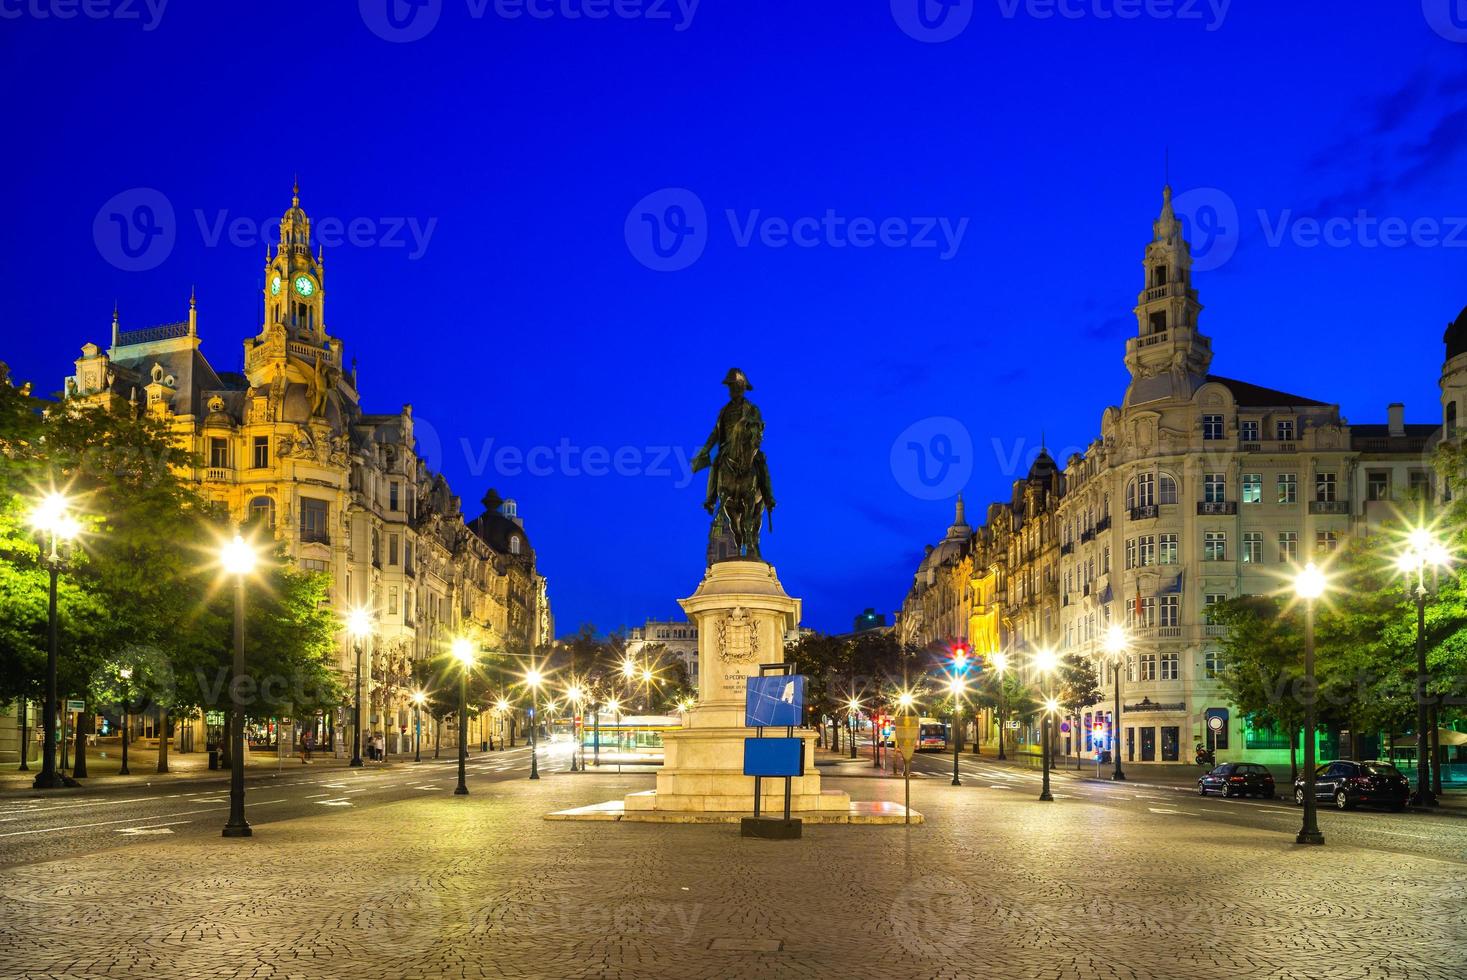 King Peter IV statue at Liberdade Square in Porto, Portugal photo